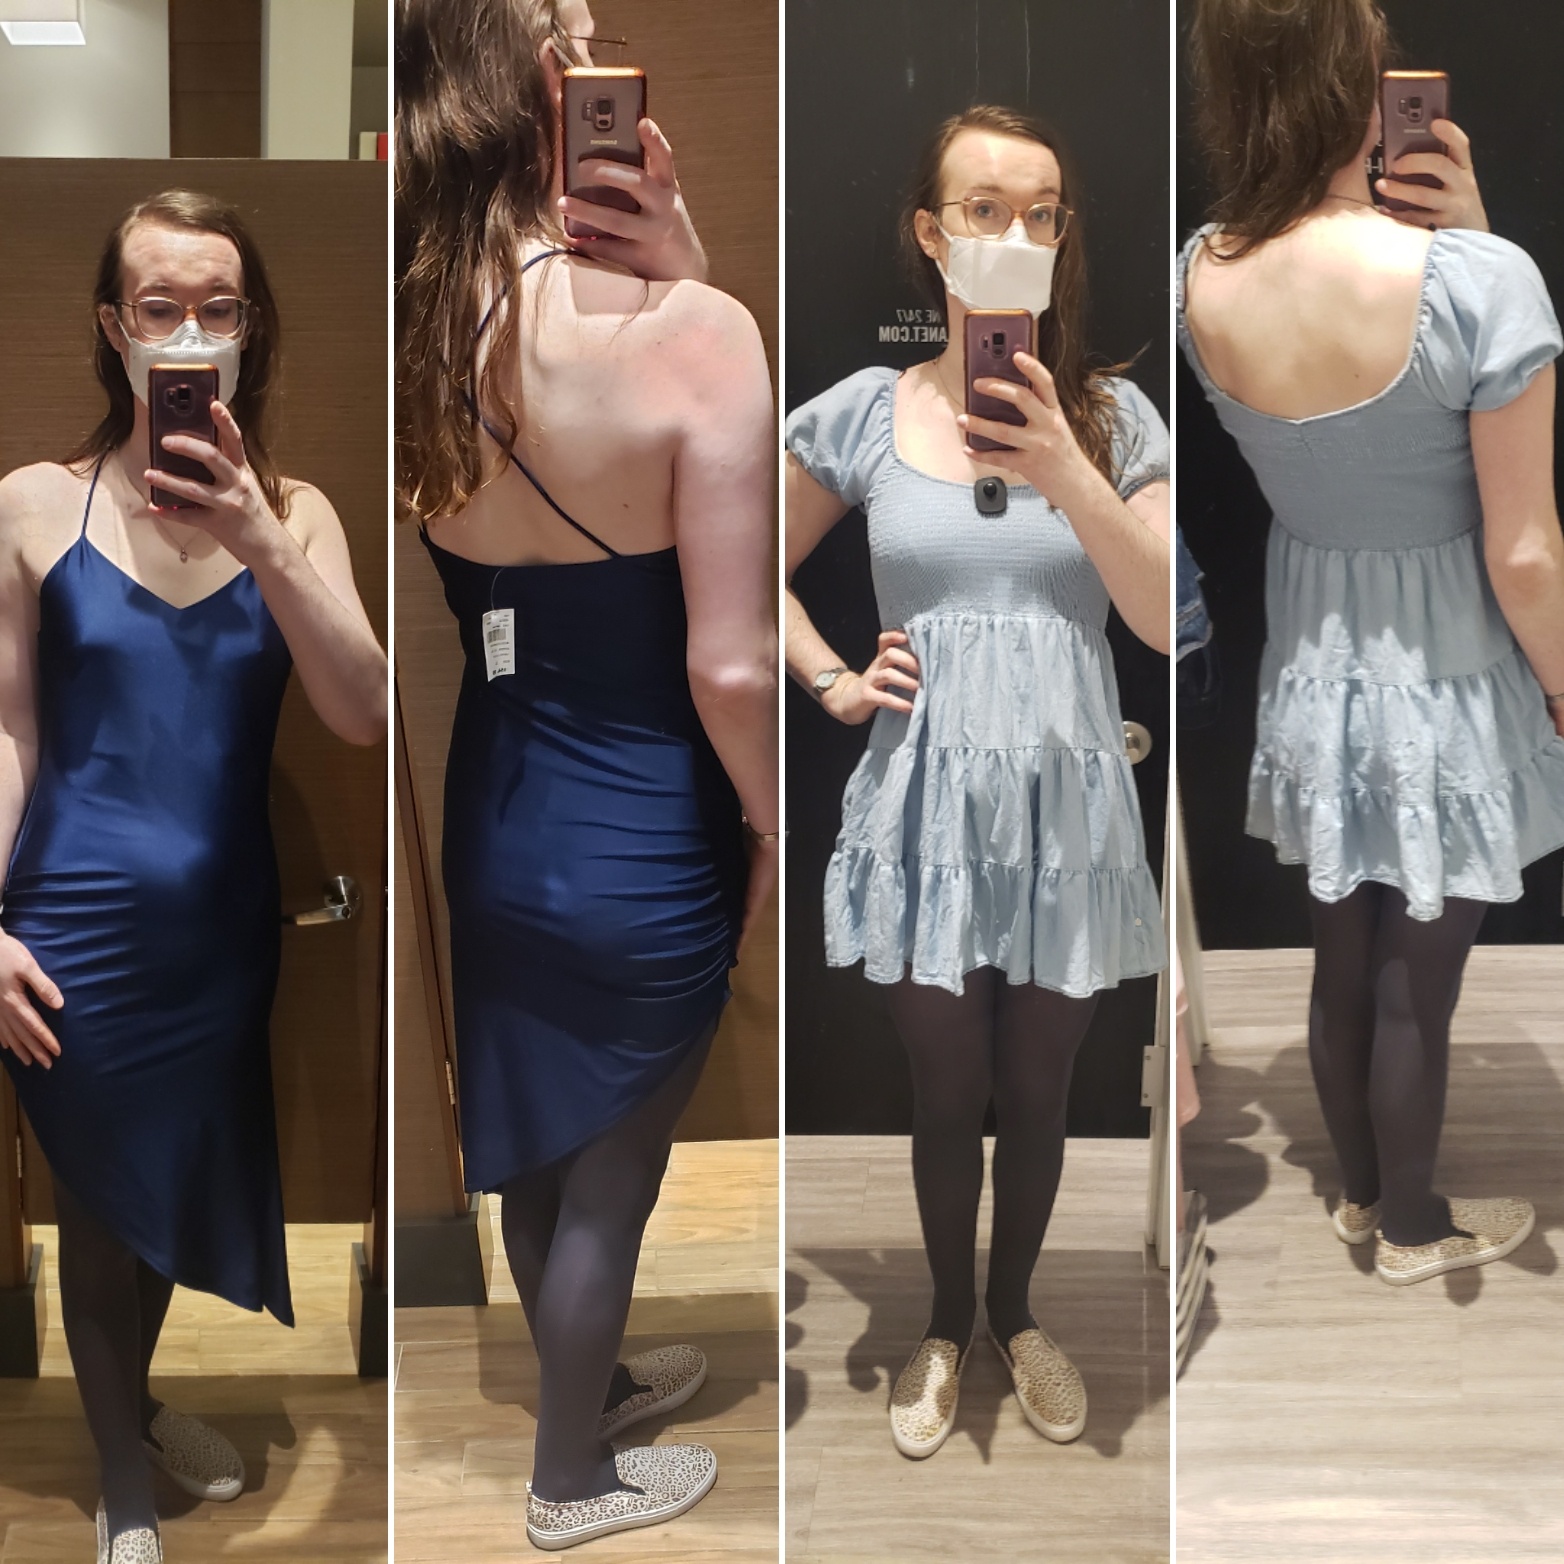 Four fitting room selfies. The first two are in a dark blue dress with thin straps that cross over in the back. The second two are in a light blue dress with cap sleeves.